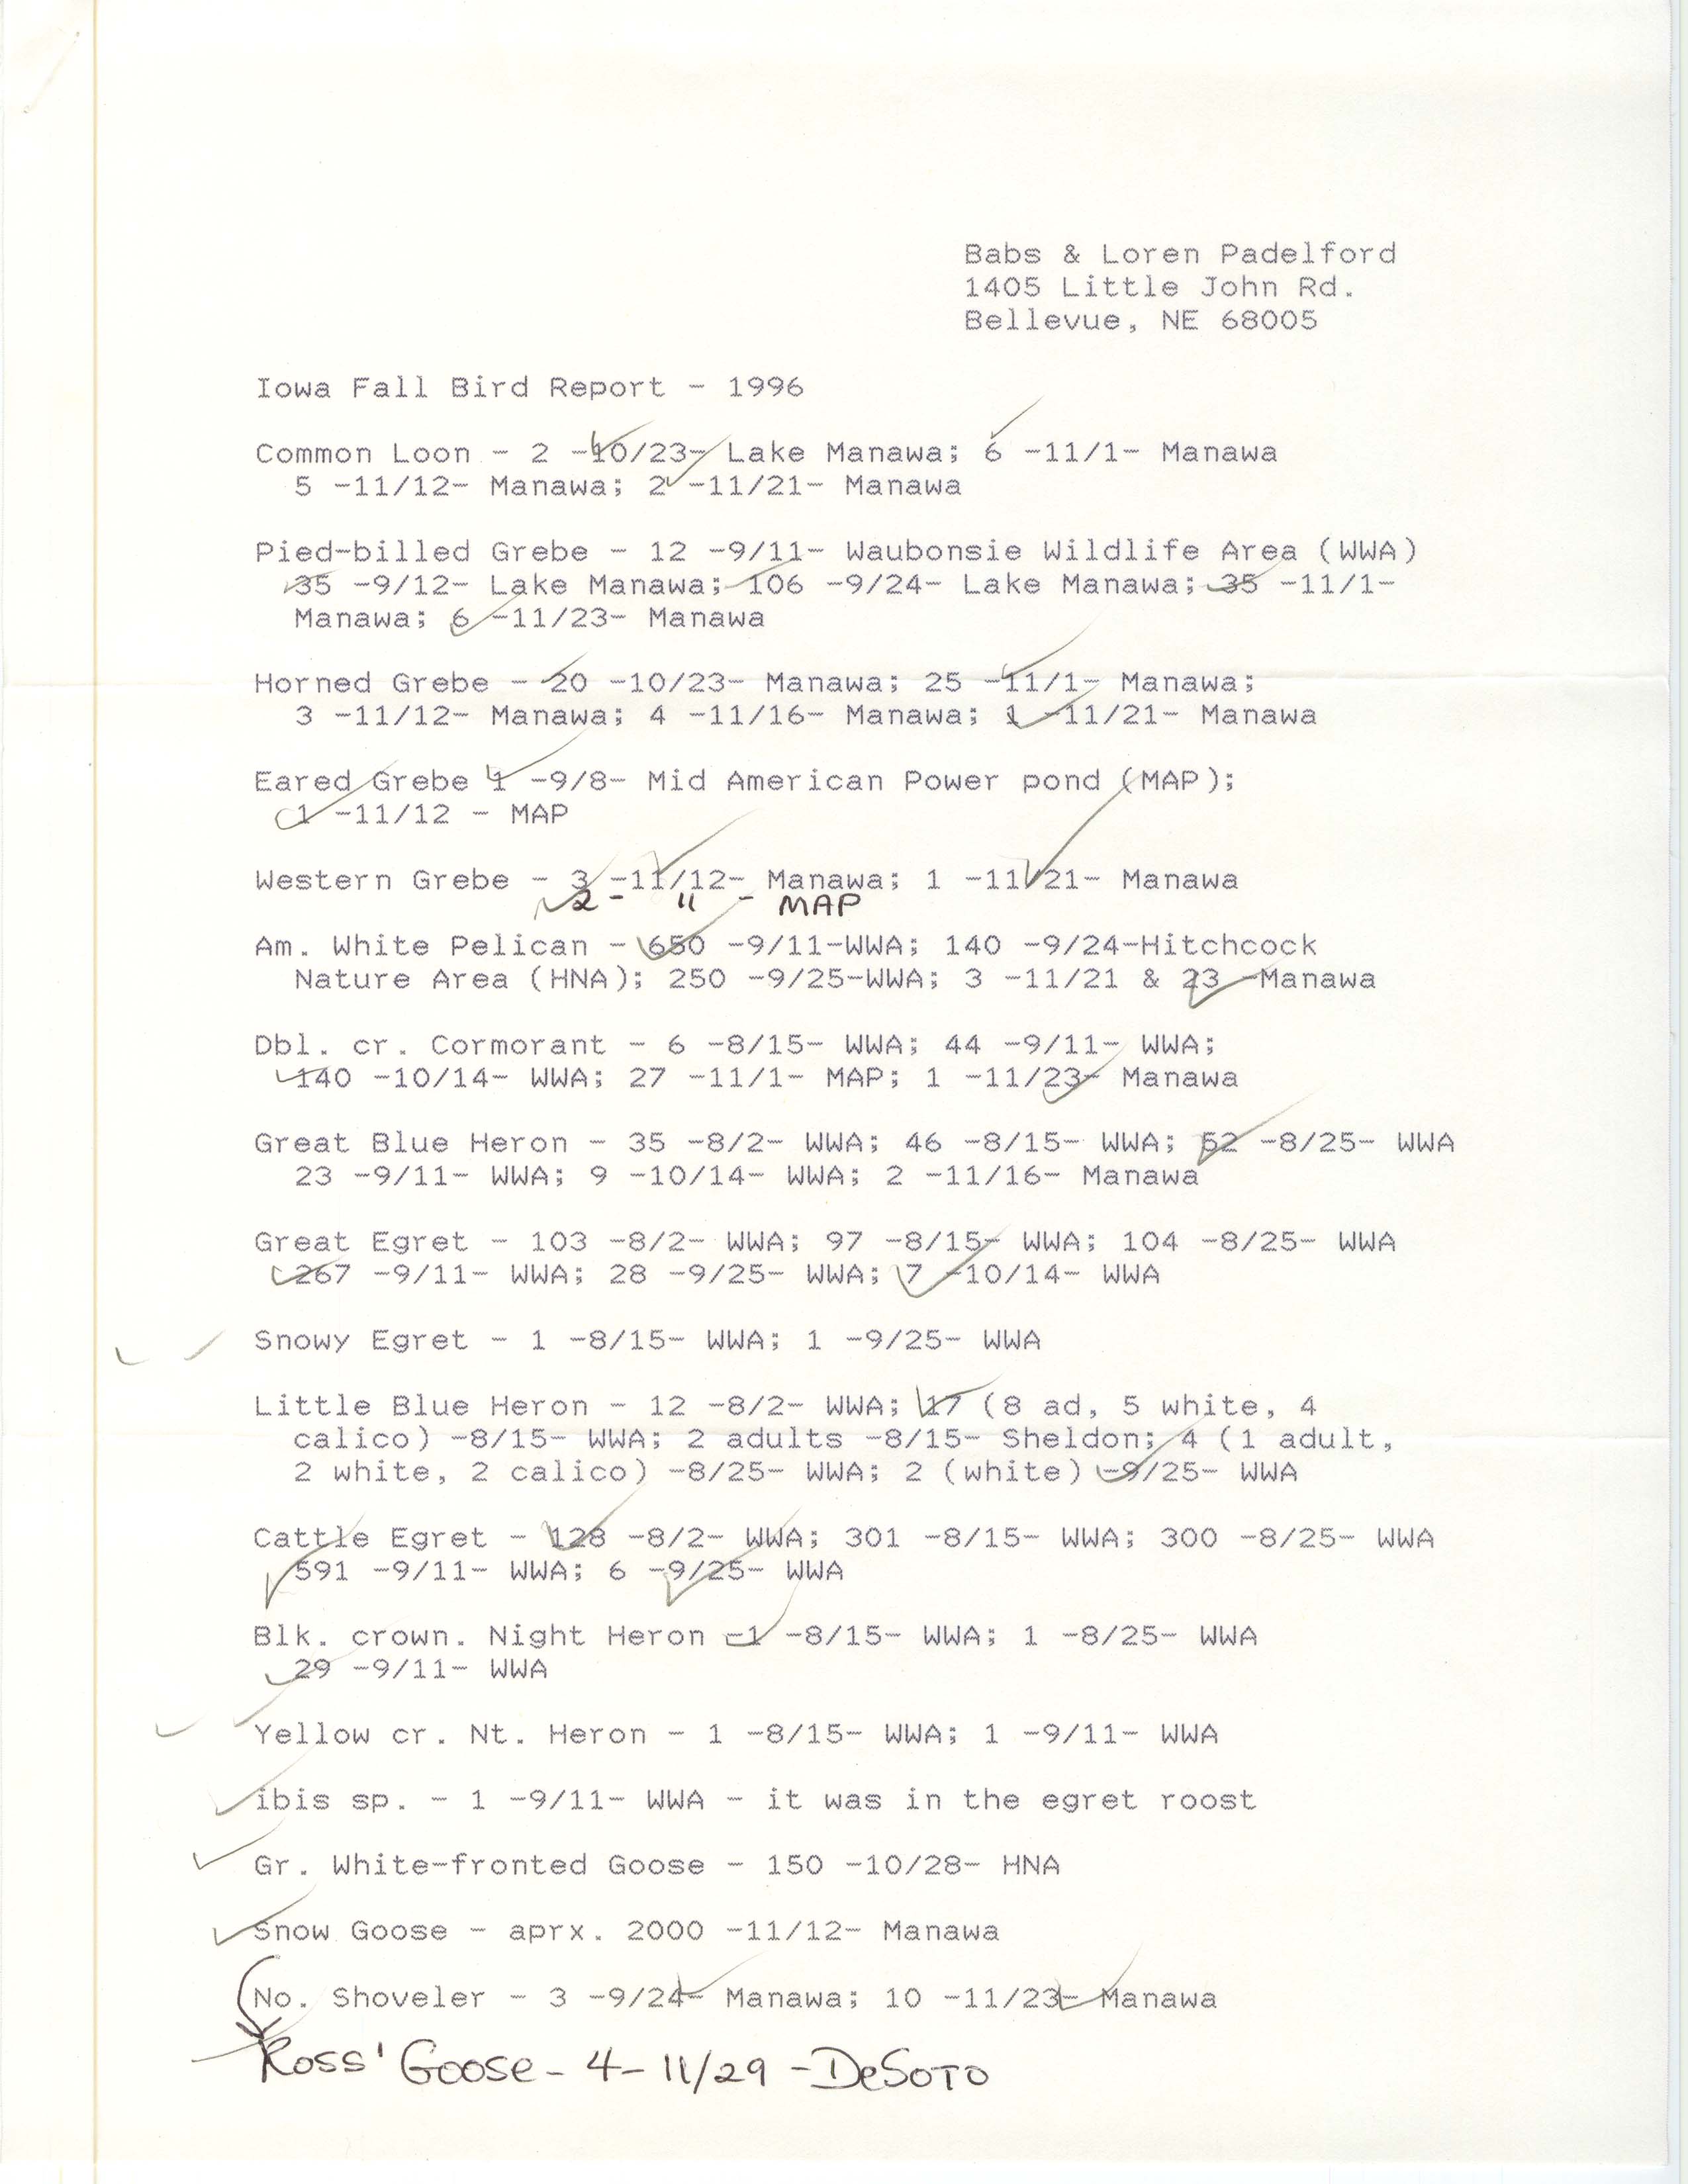 Field notes contributed by Babs Padelford and Loren Padelford, fall 1996